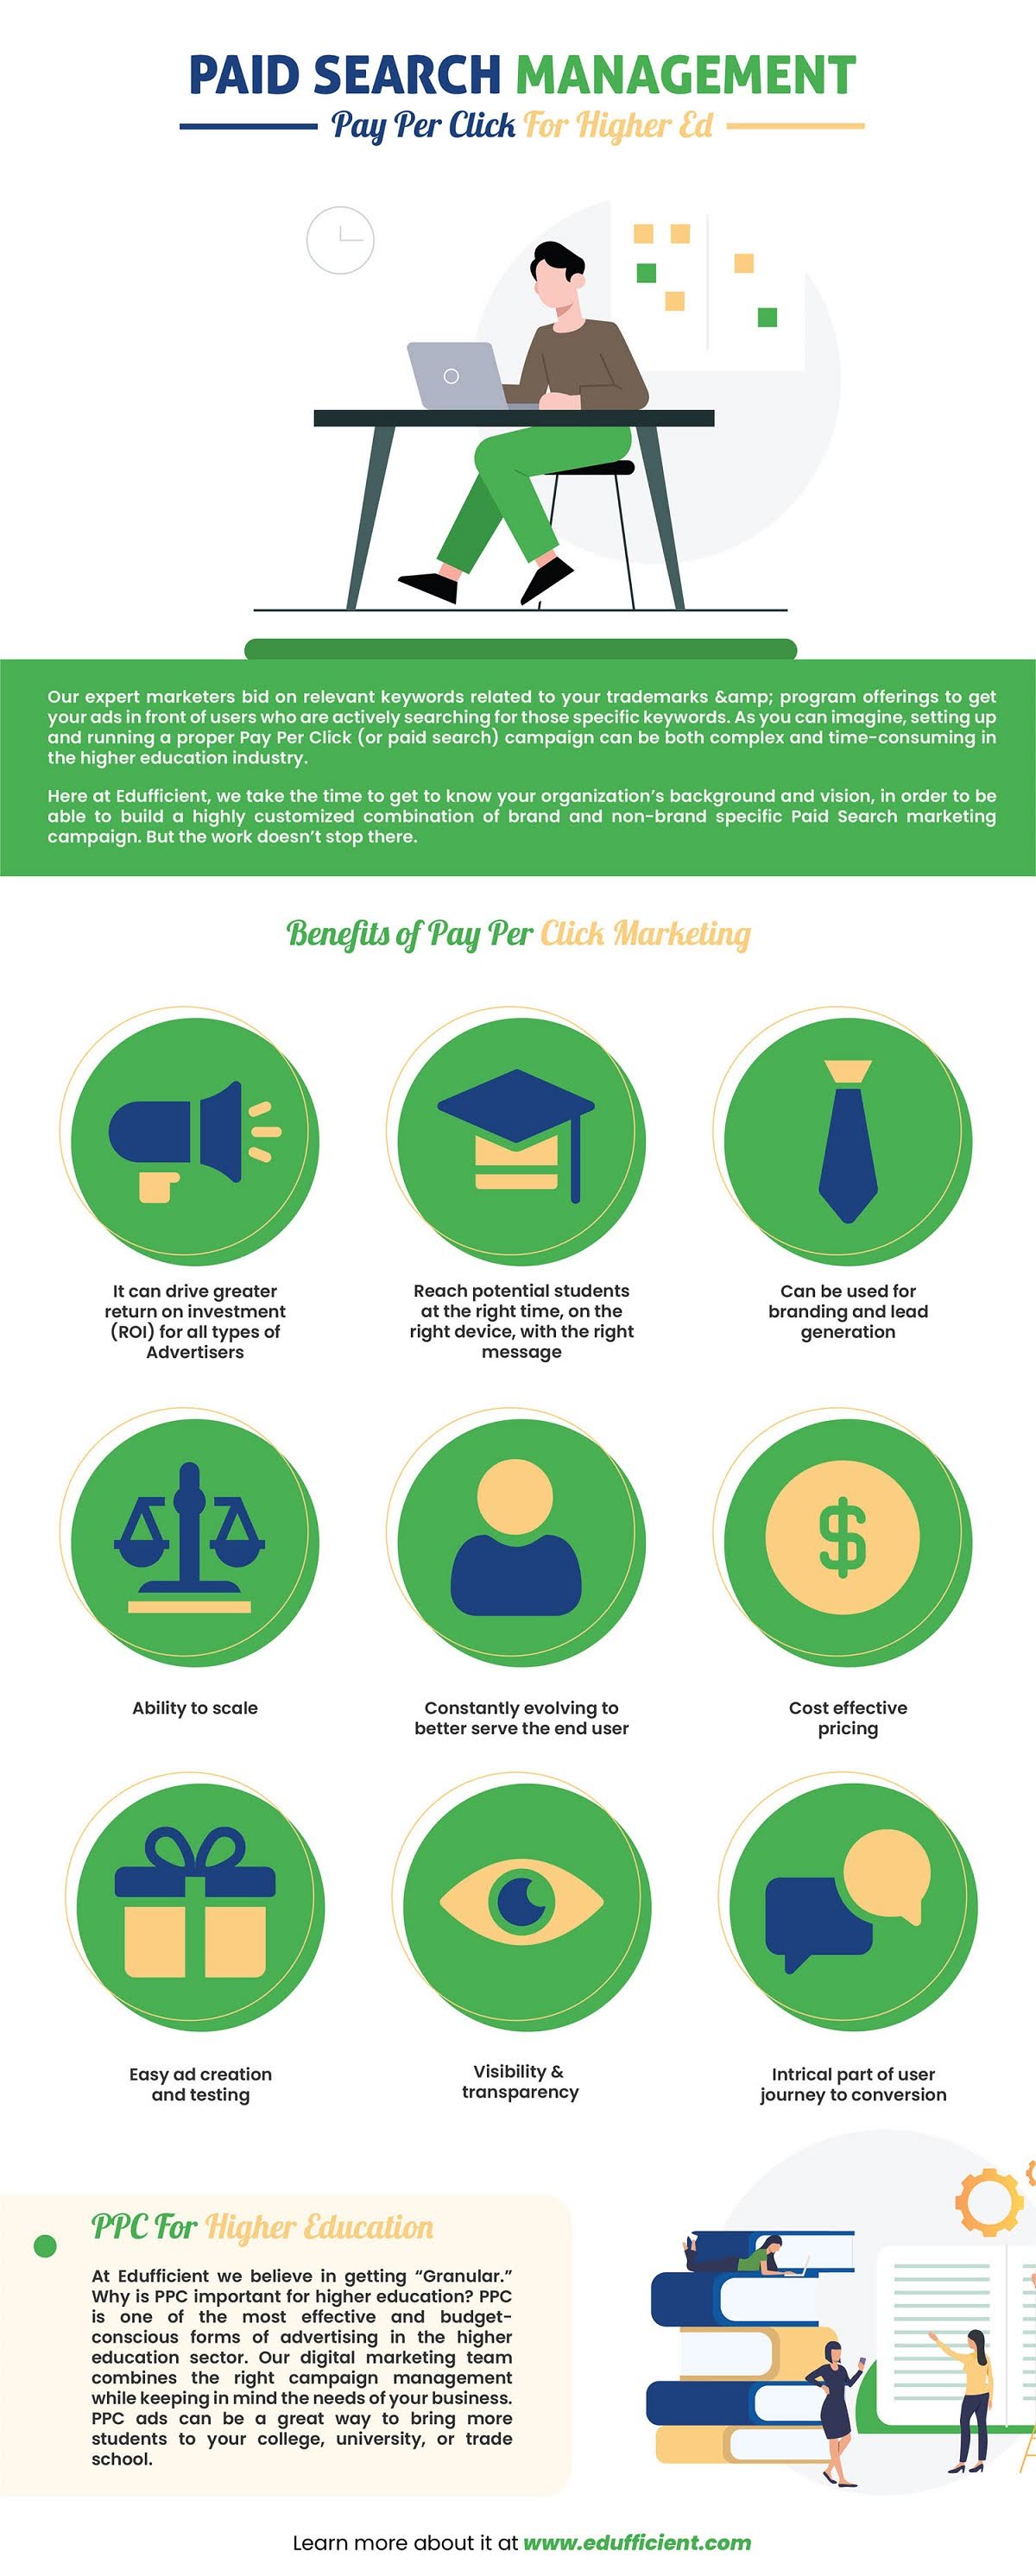 PPC Education – Paid Search Management – Pay Per Click For Higher Ed #infographic